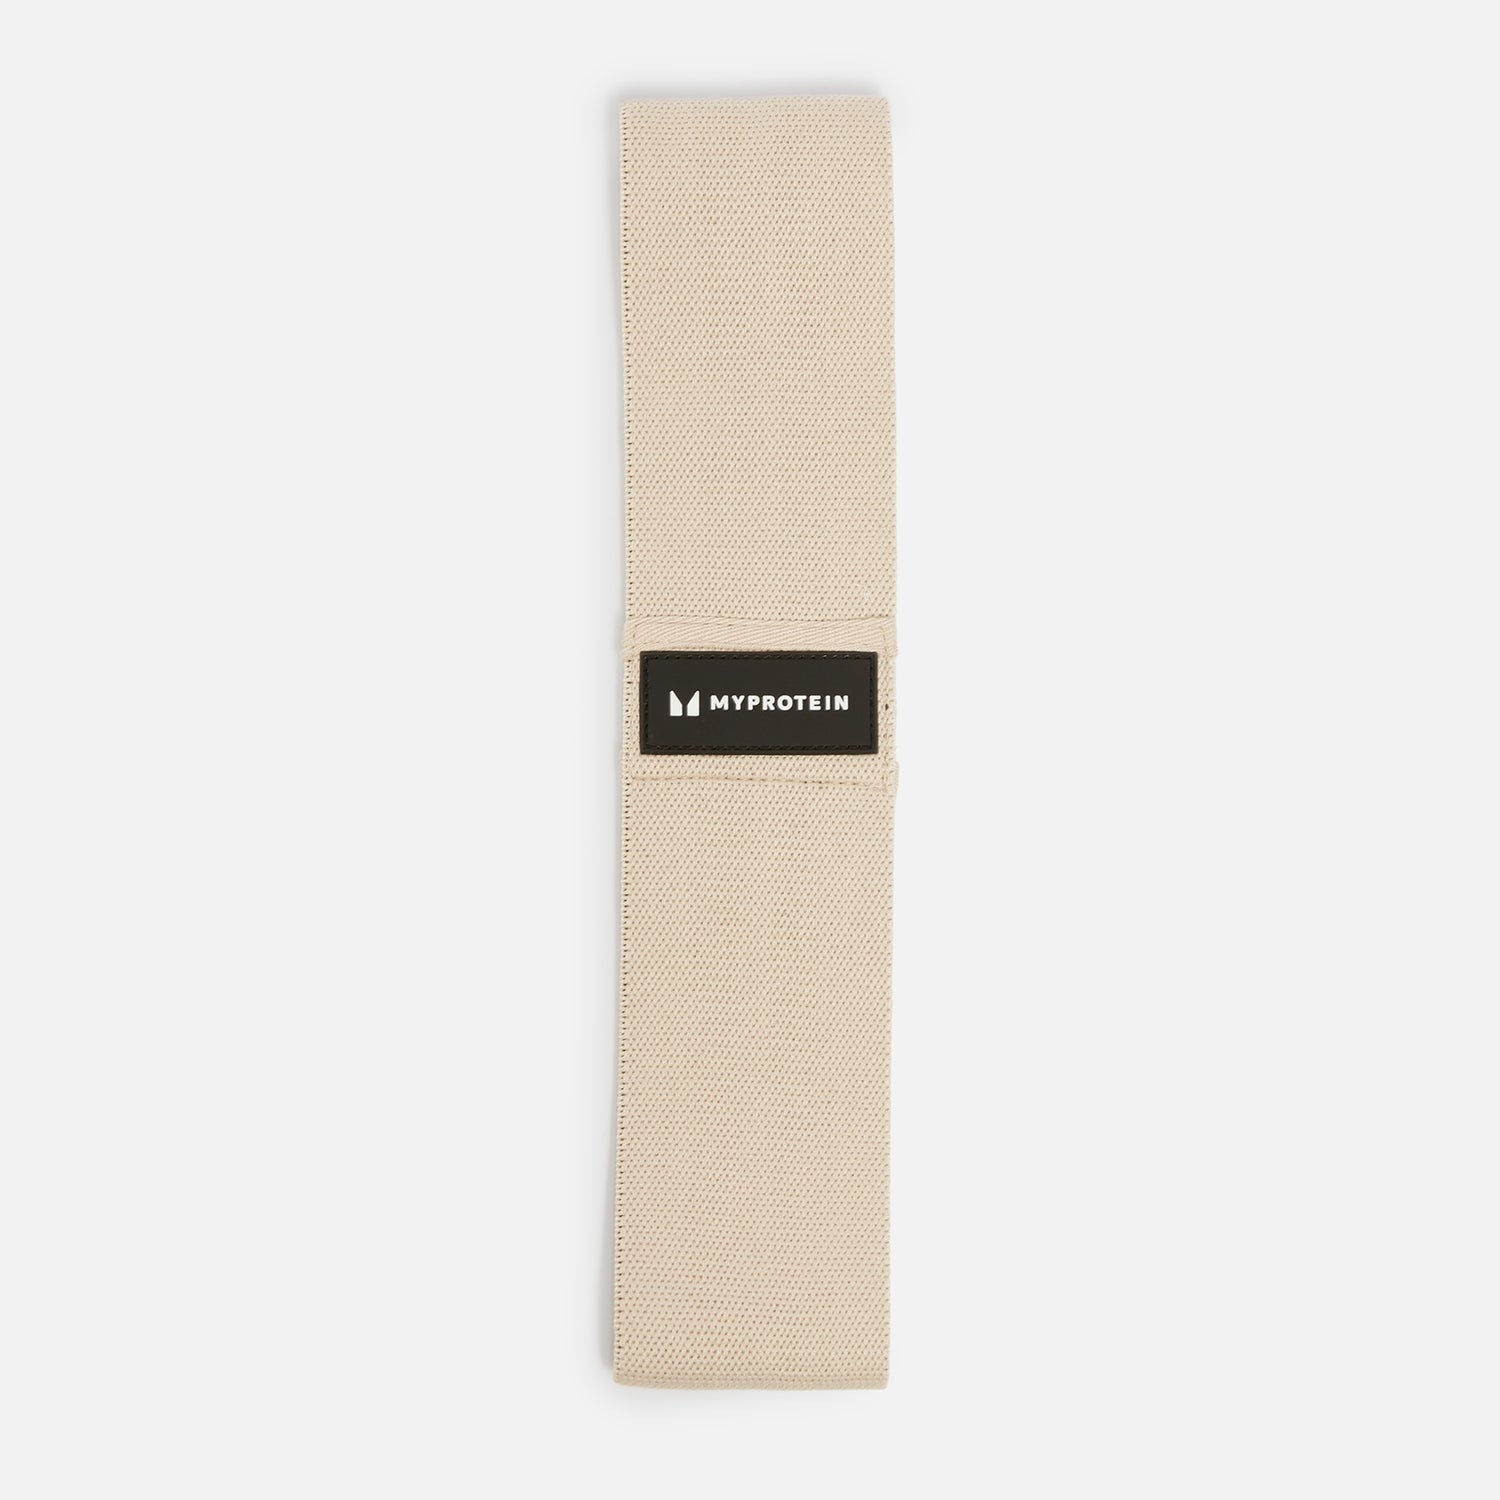 Myprotein Booty Band – Light – Natural Cream